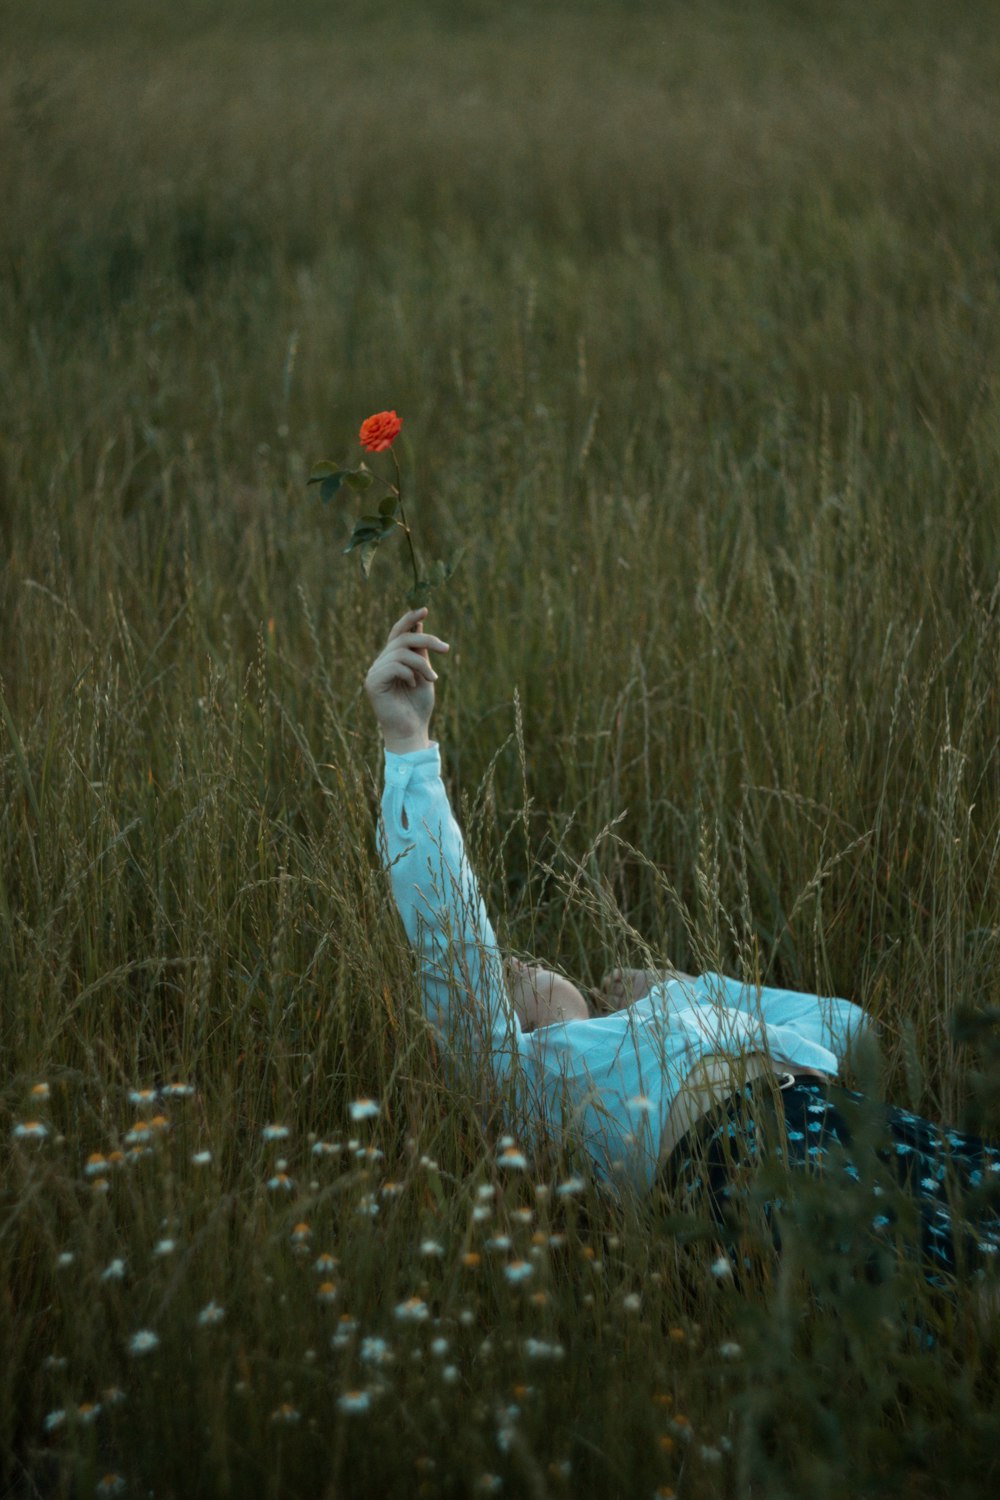 a person holding a flower in a field